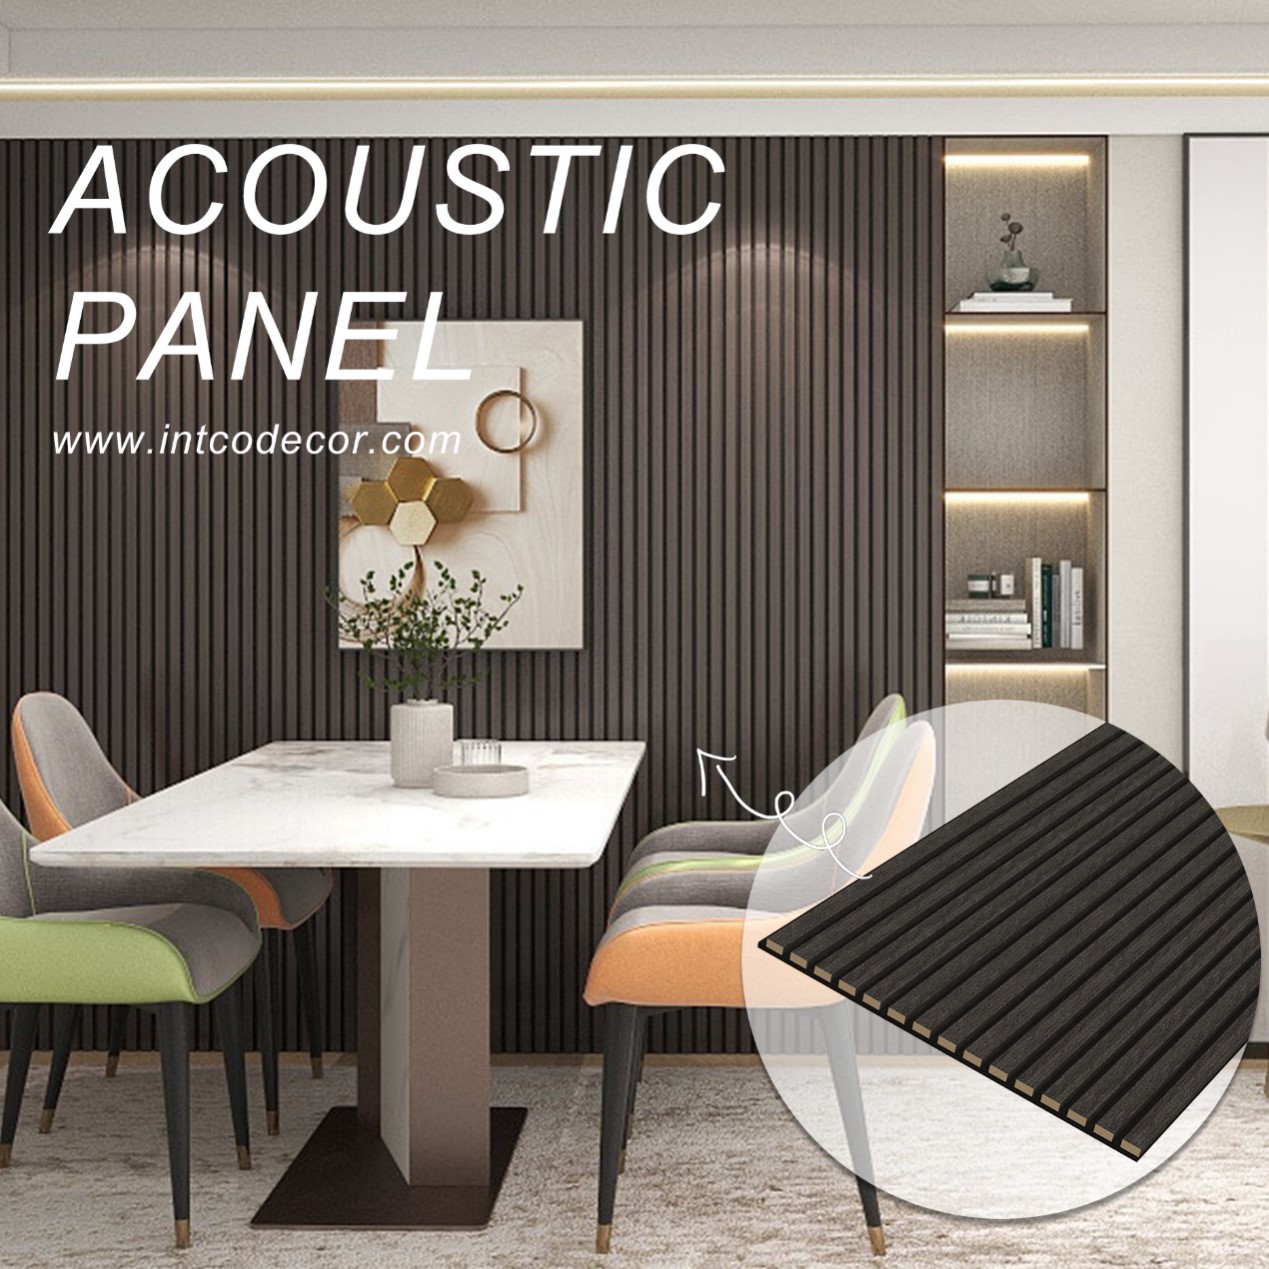 Cover your walls with elegant acoustical wall panels